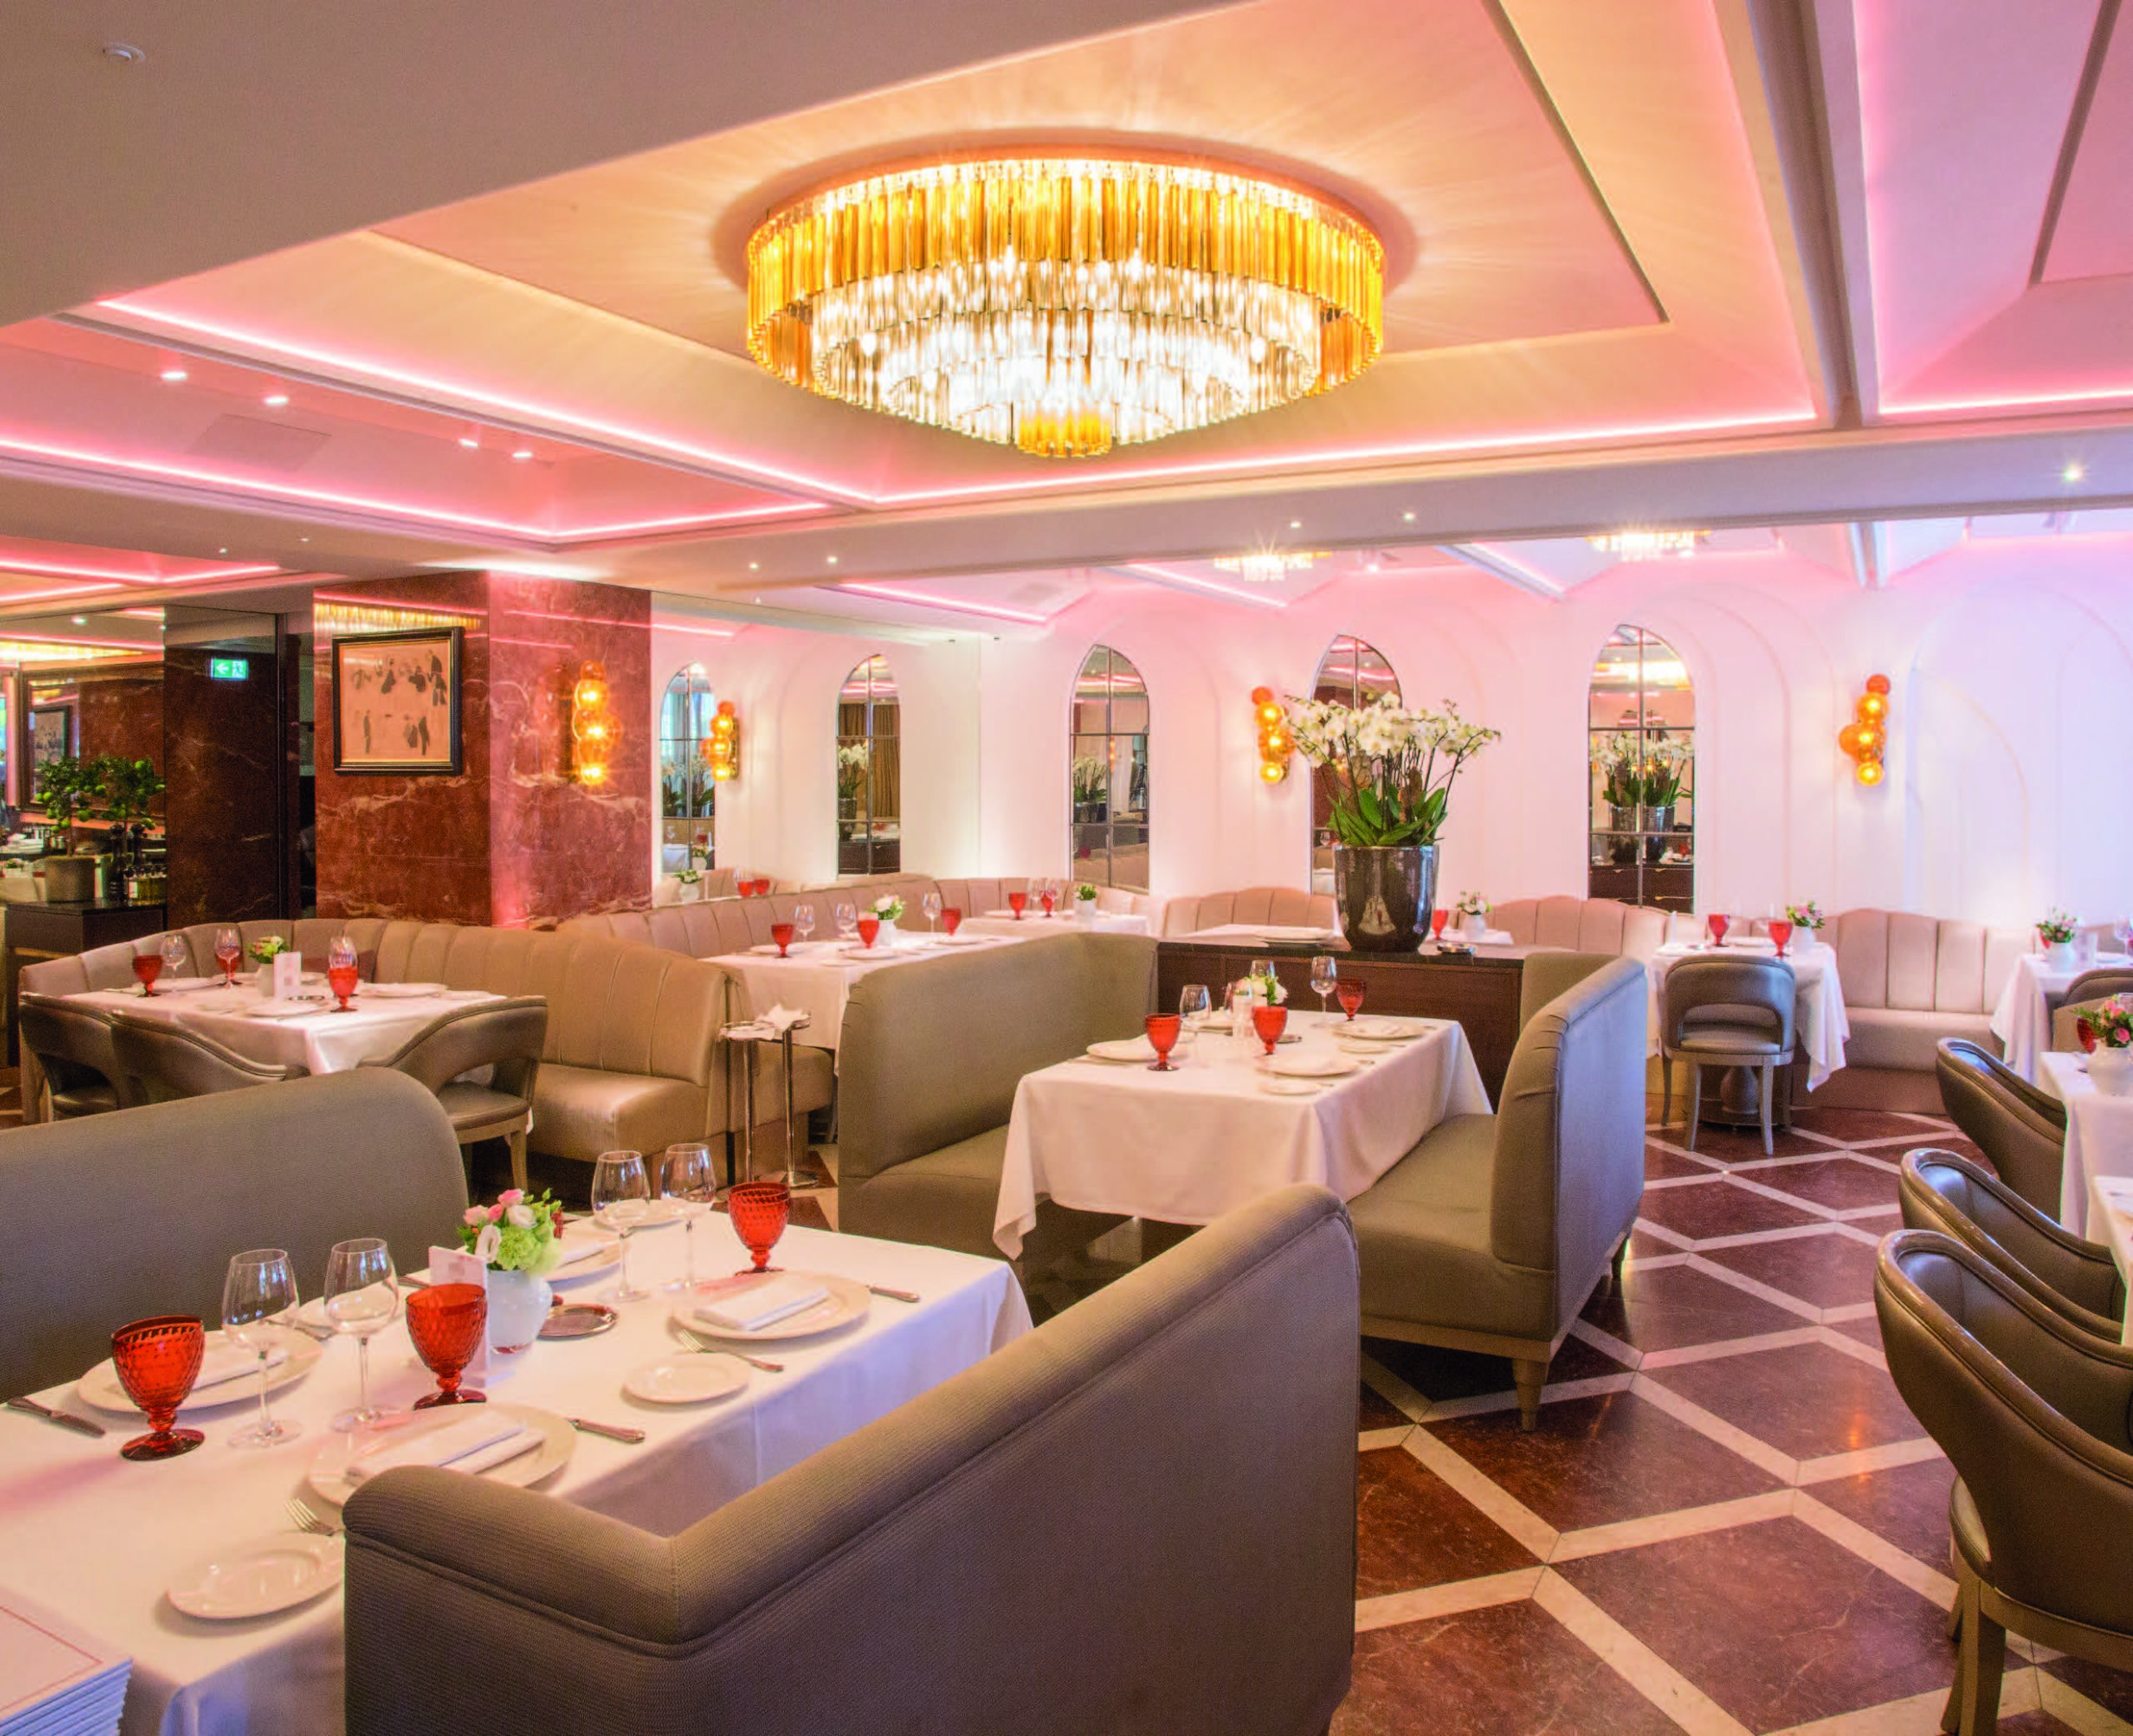 Food For Thought: Why Rampoldi, Monte Carlo, is still – after 77 years – the thinking foodie’s dining destination du jour